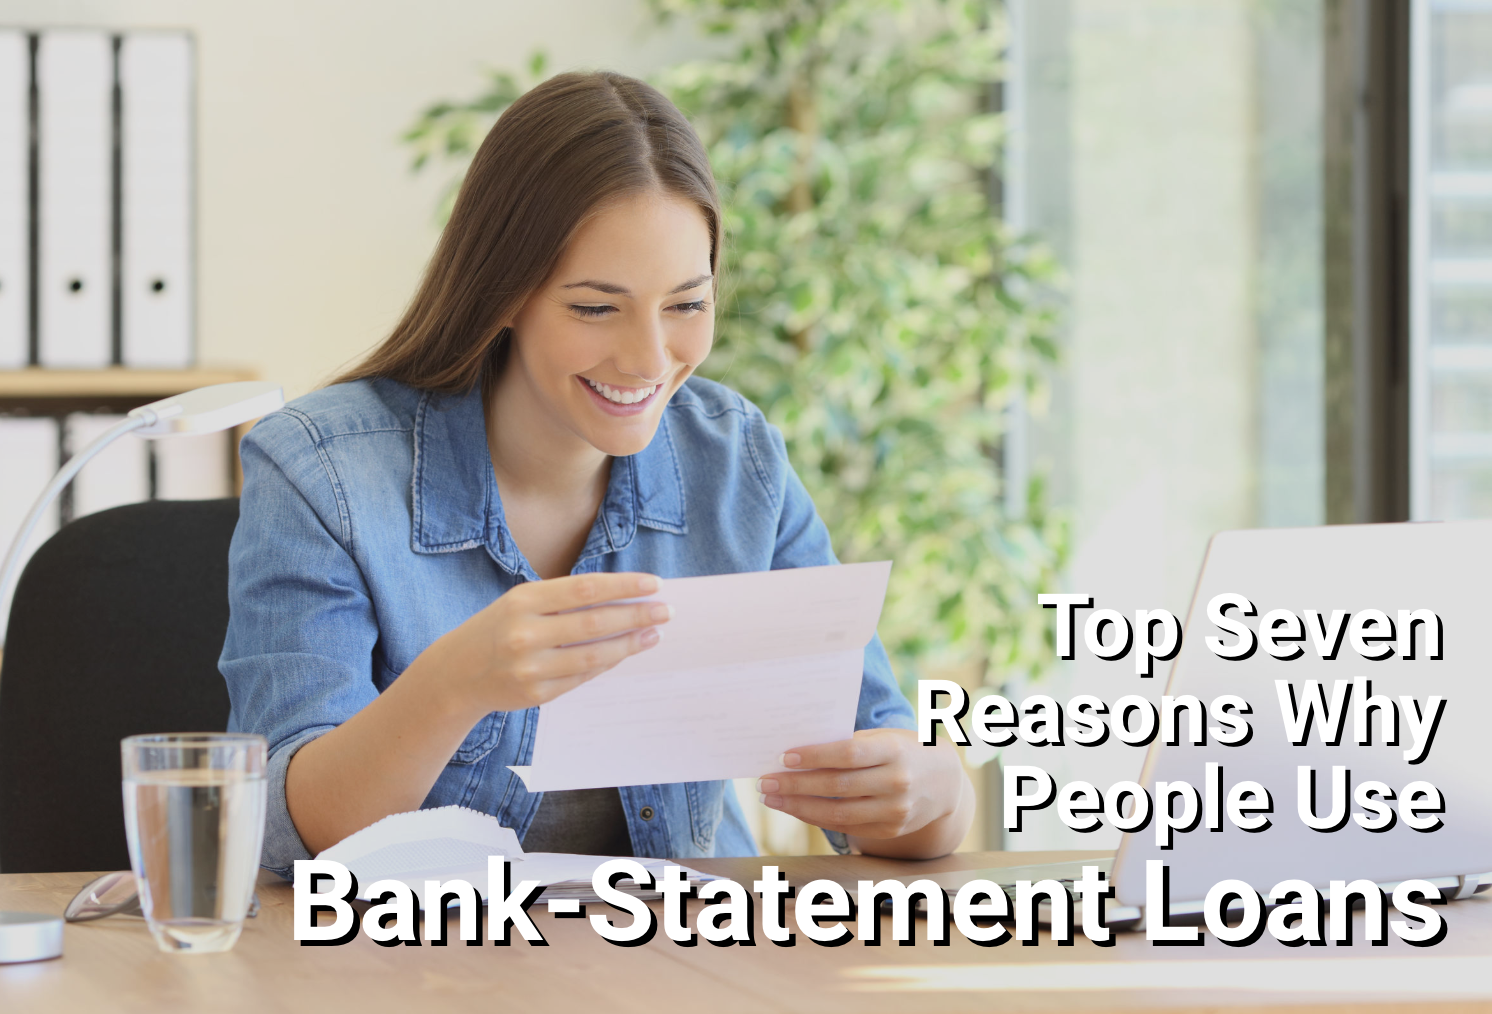 Woman looking at bank statement and smiling